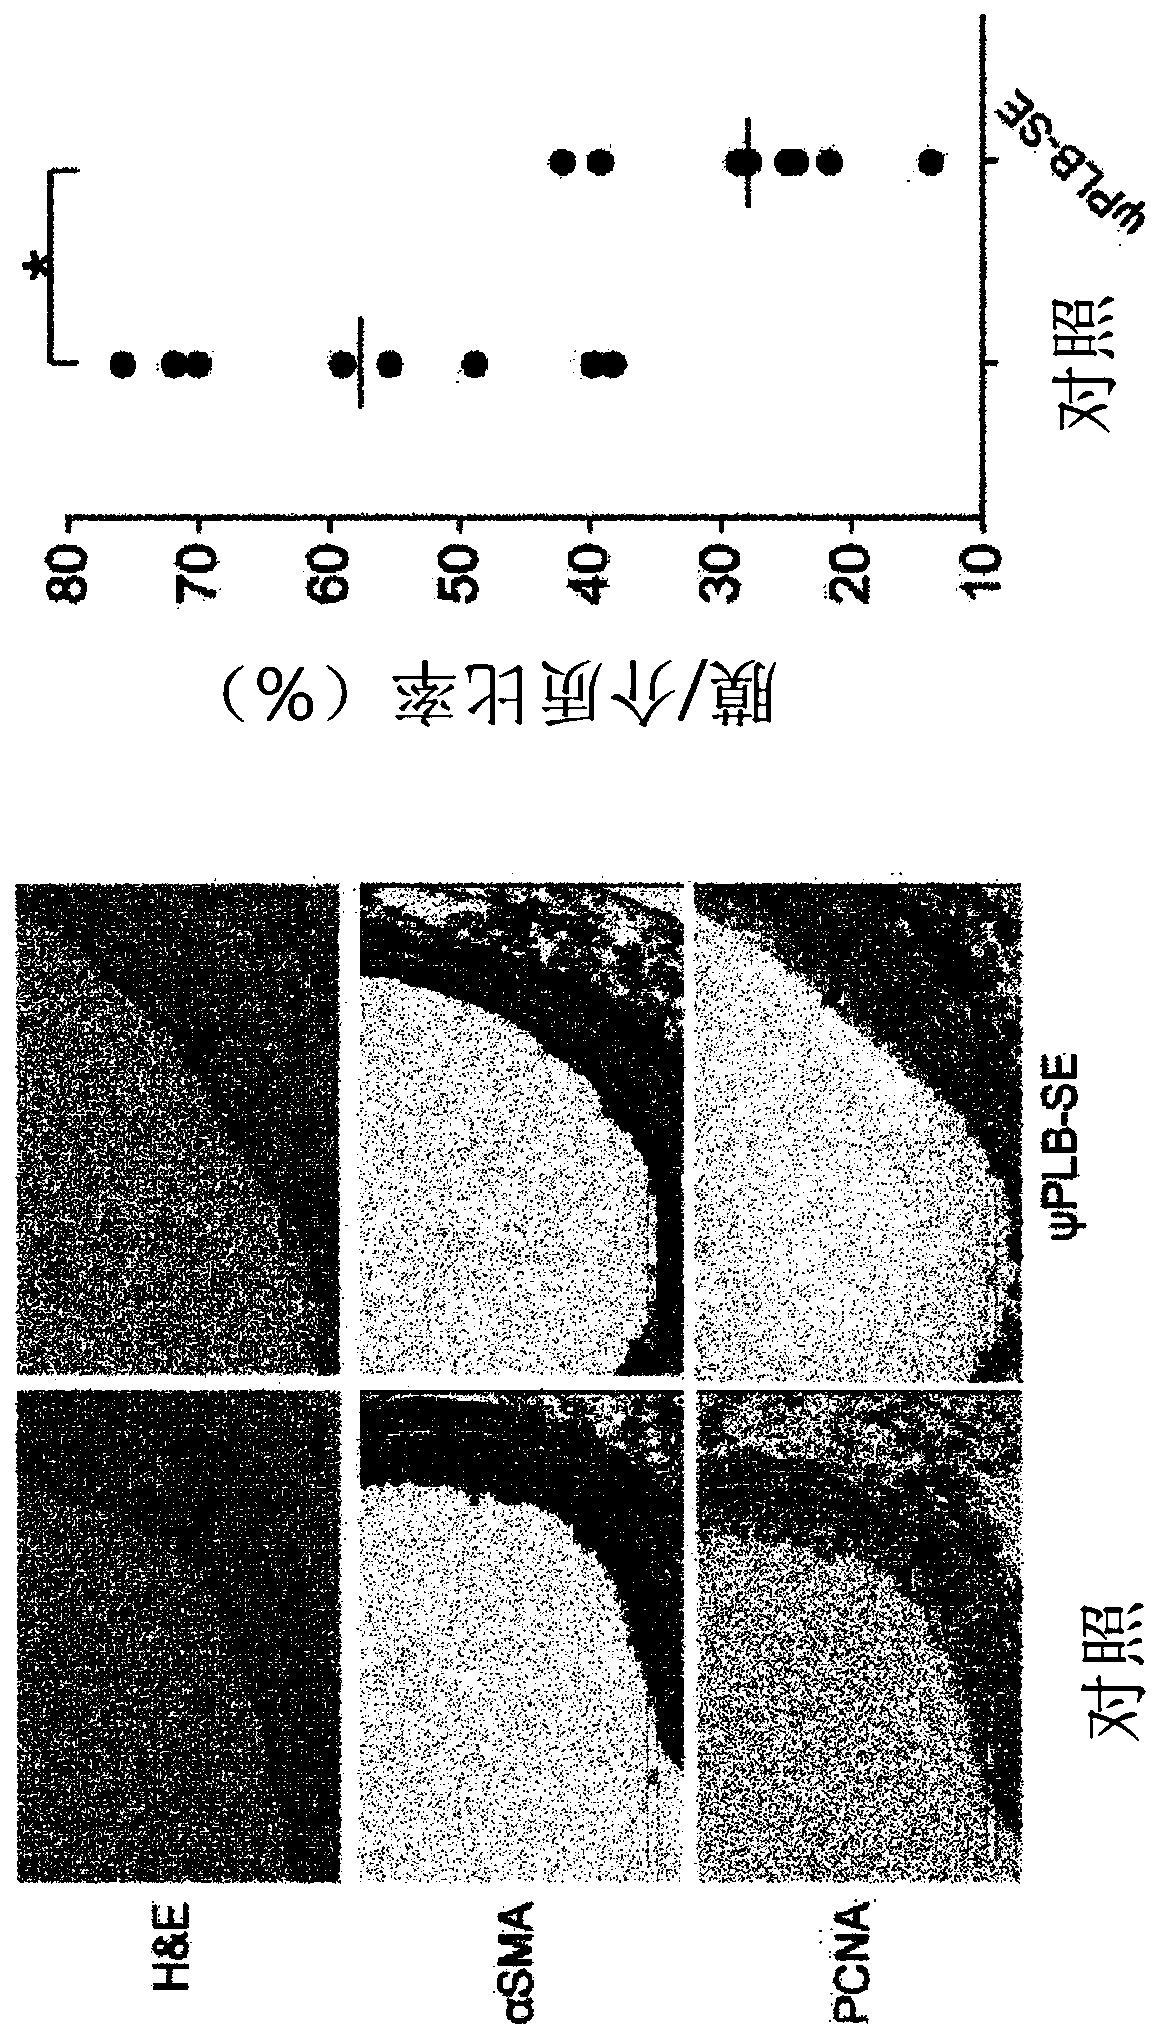 Composition comprising protein phosphatase 1 inhibitory peptide for treating vascular diseases